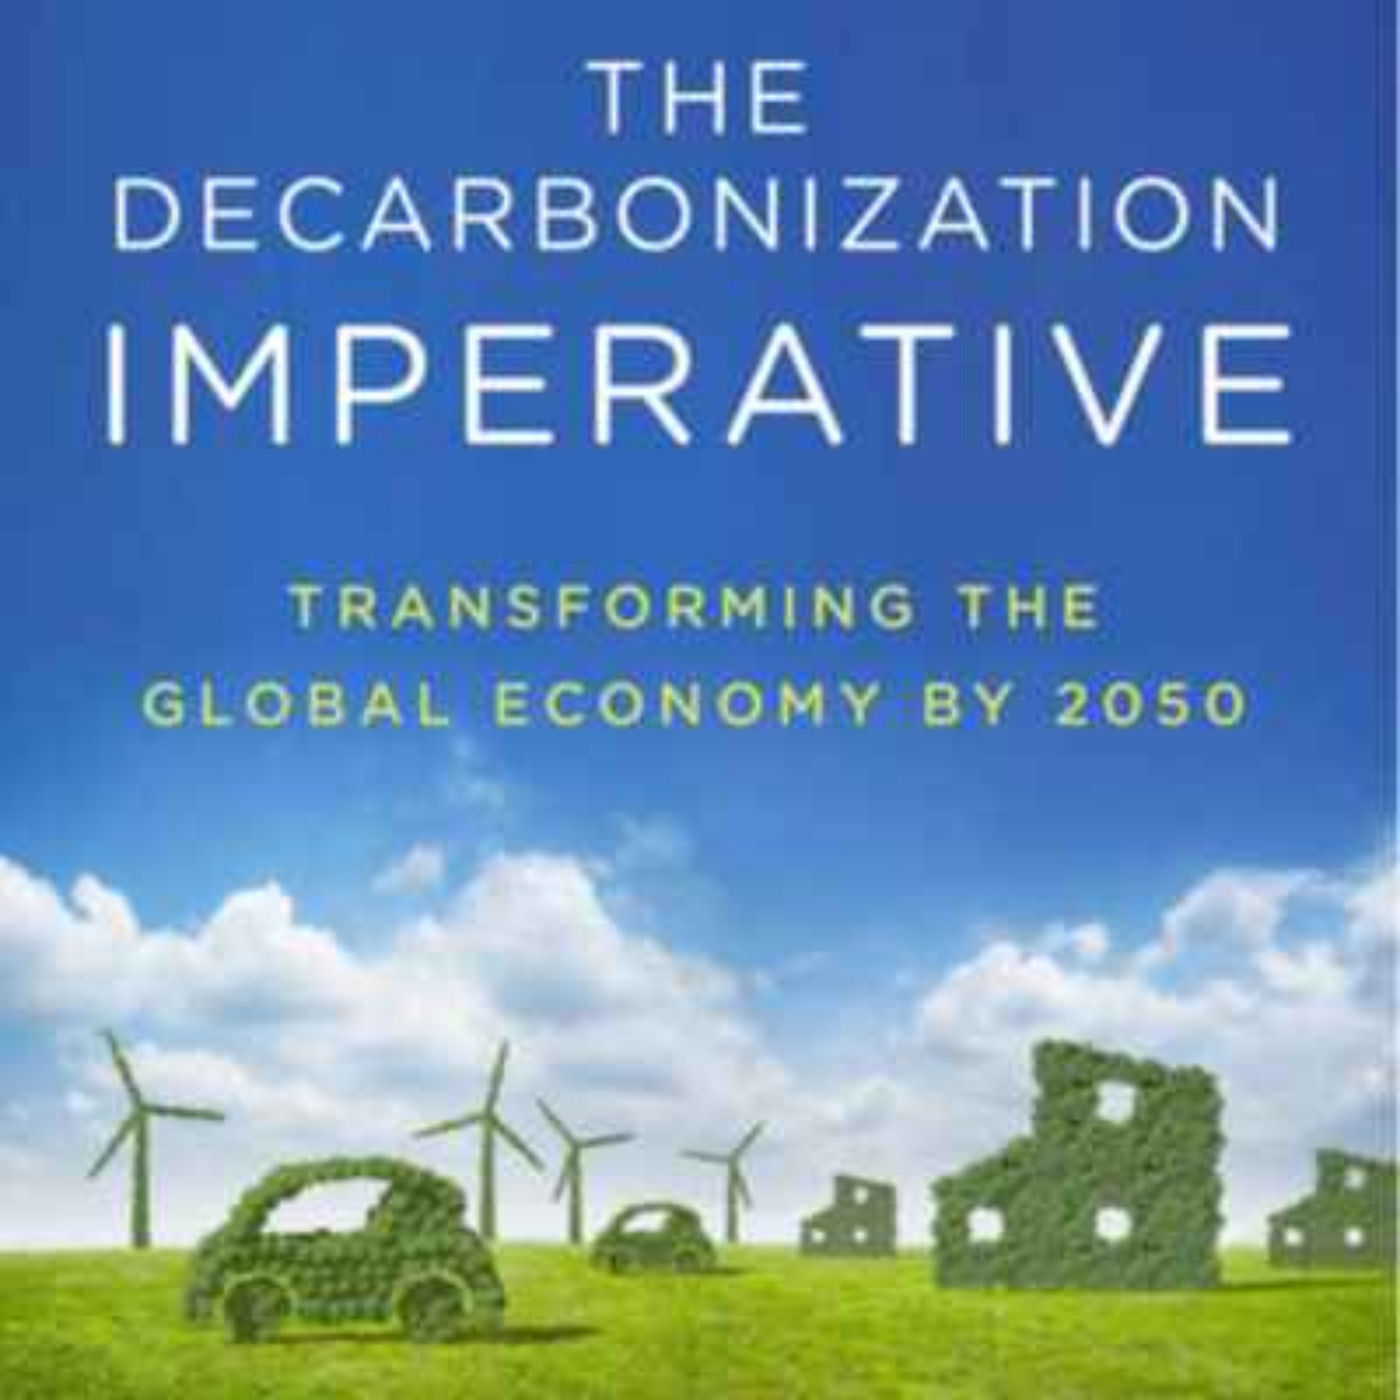 532: Michael Lenox, part 3: How to Decarbonize the Global Economy by 2050